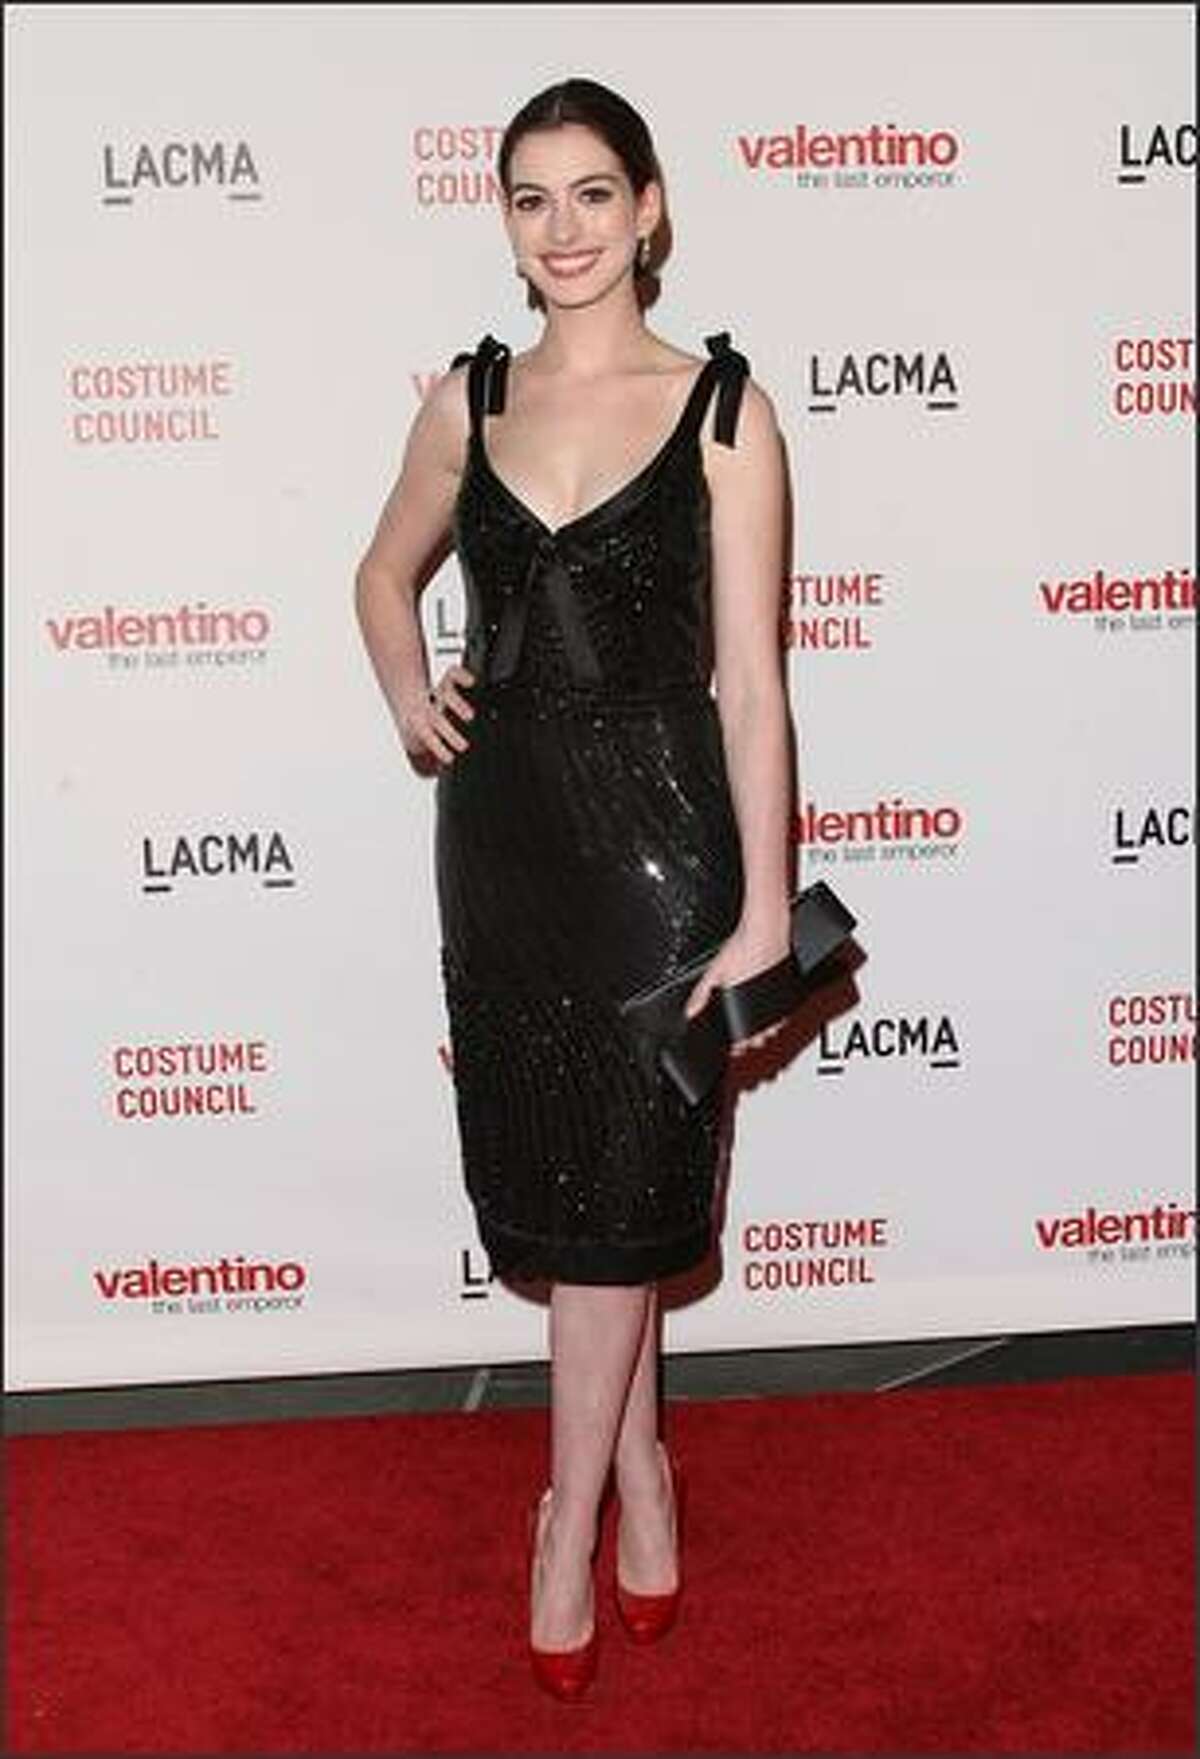 Actress Anne Hathaway attends the Los Angeles premiere of "Valentino: The Last Emperor" at the Bing Theatre at LACMA in Los Angeles, California.